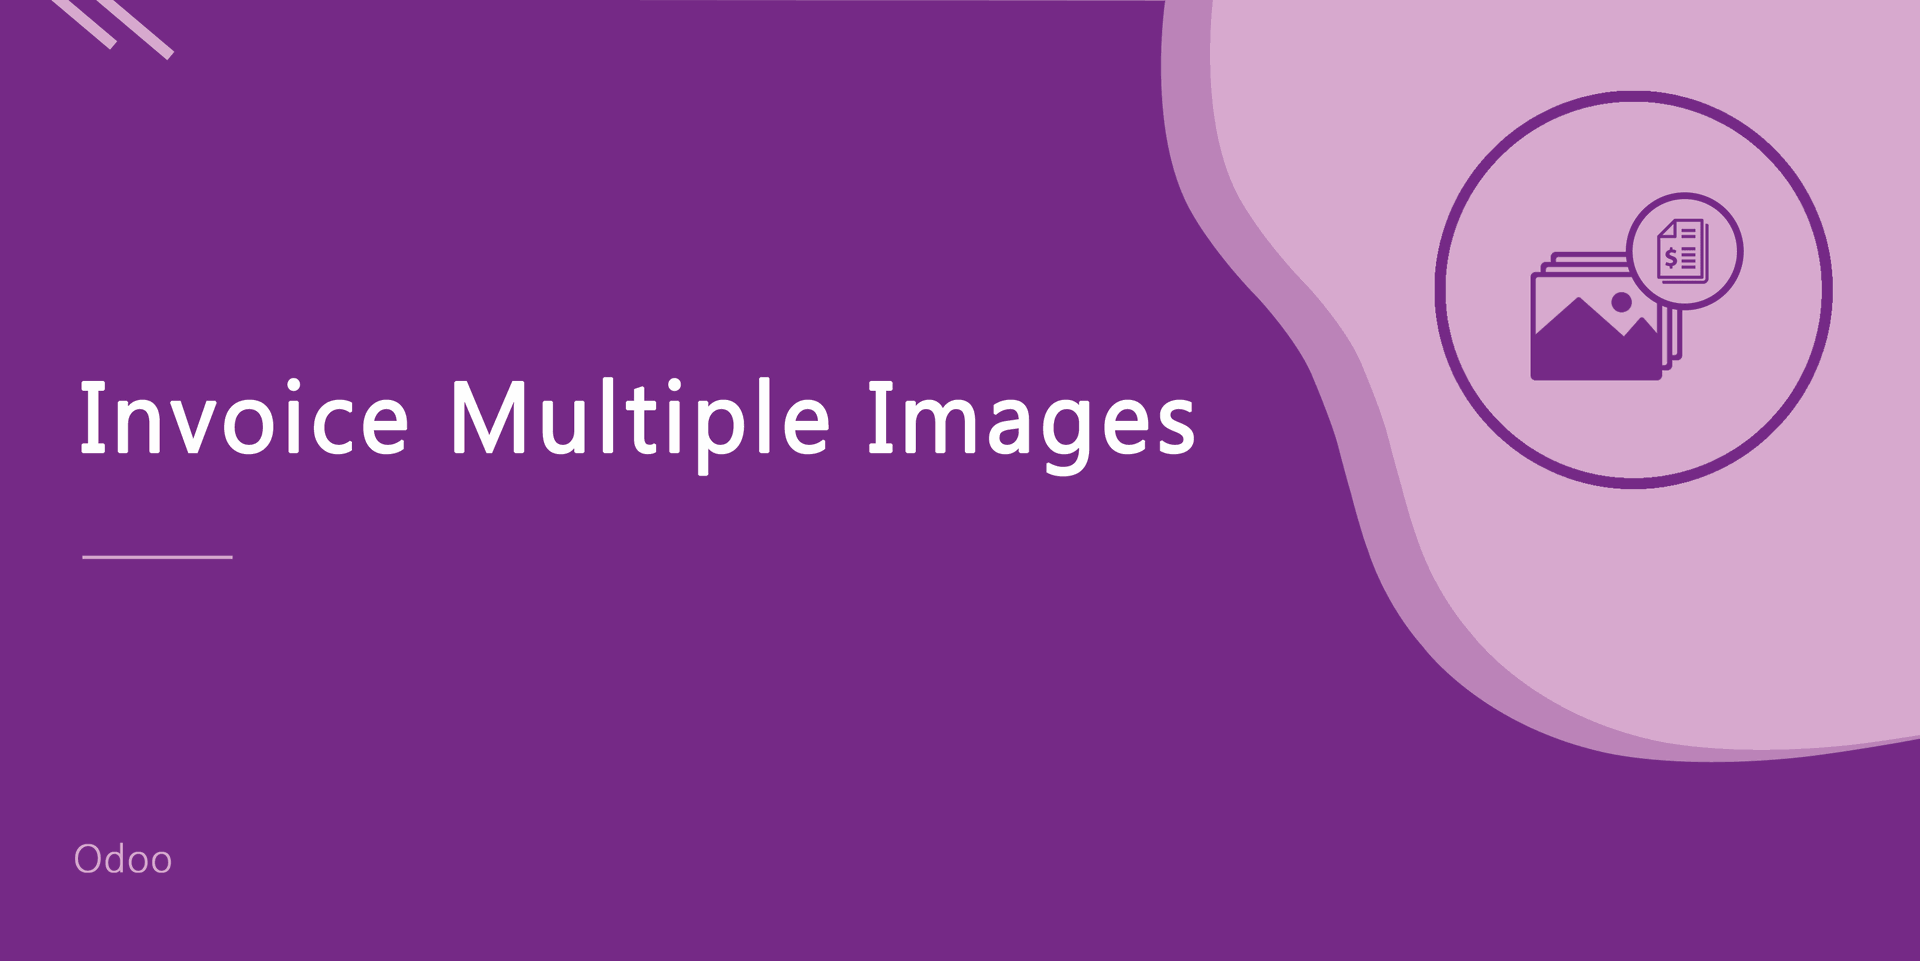 Invoice Multiple Images